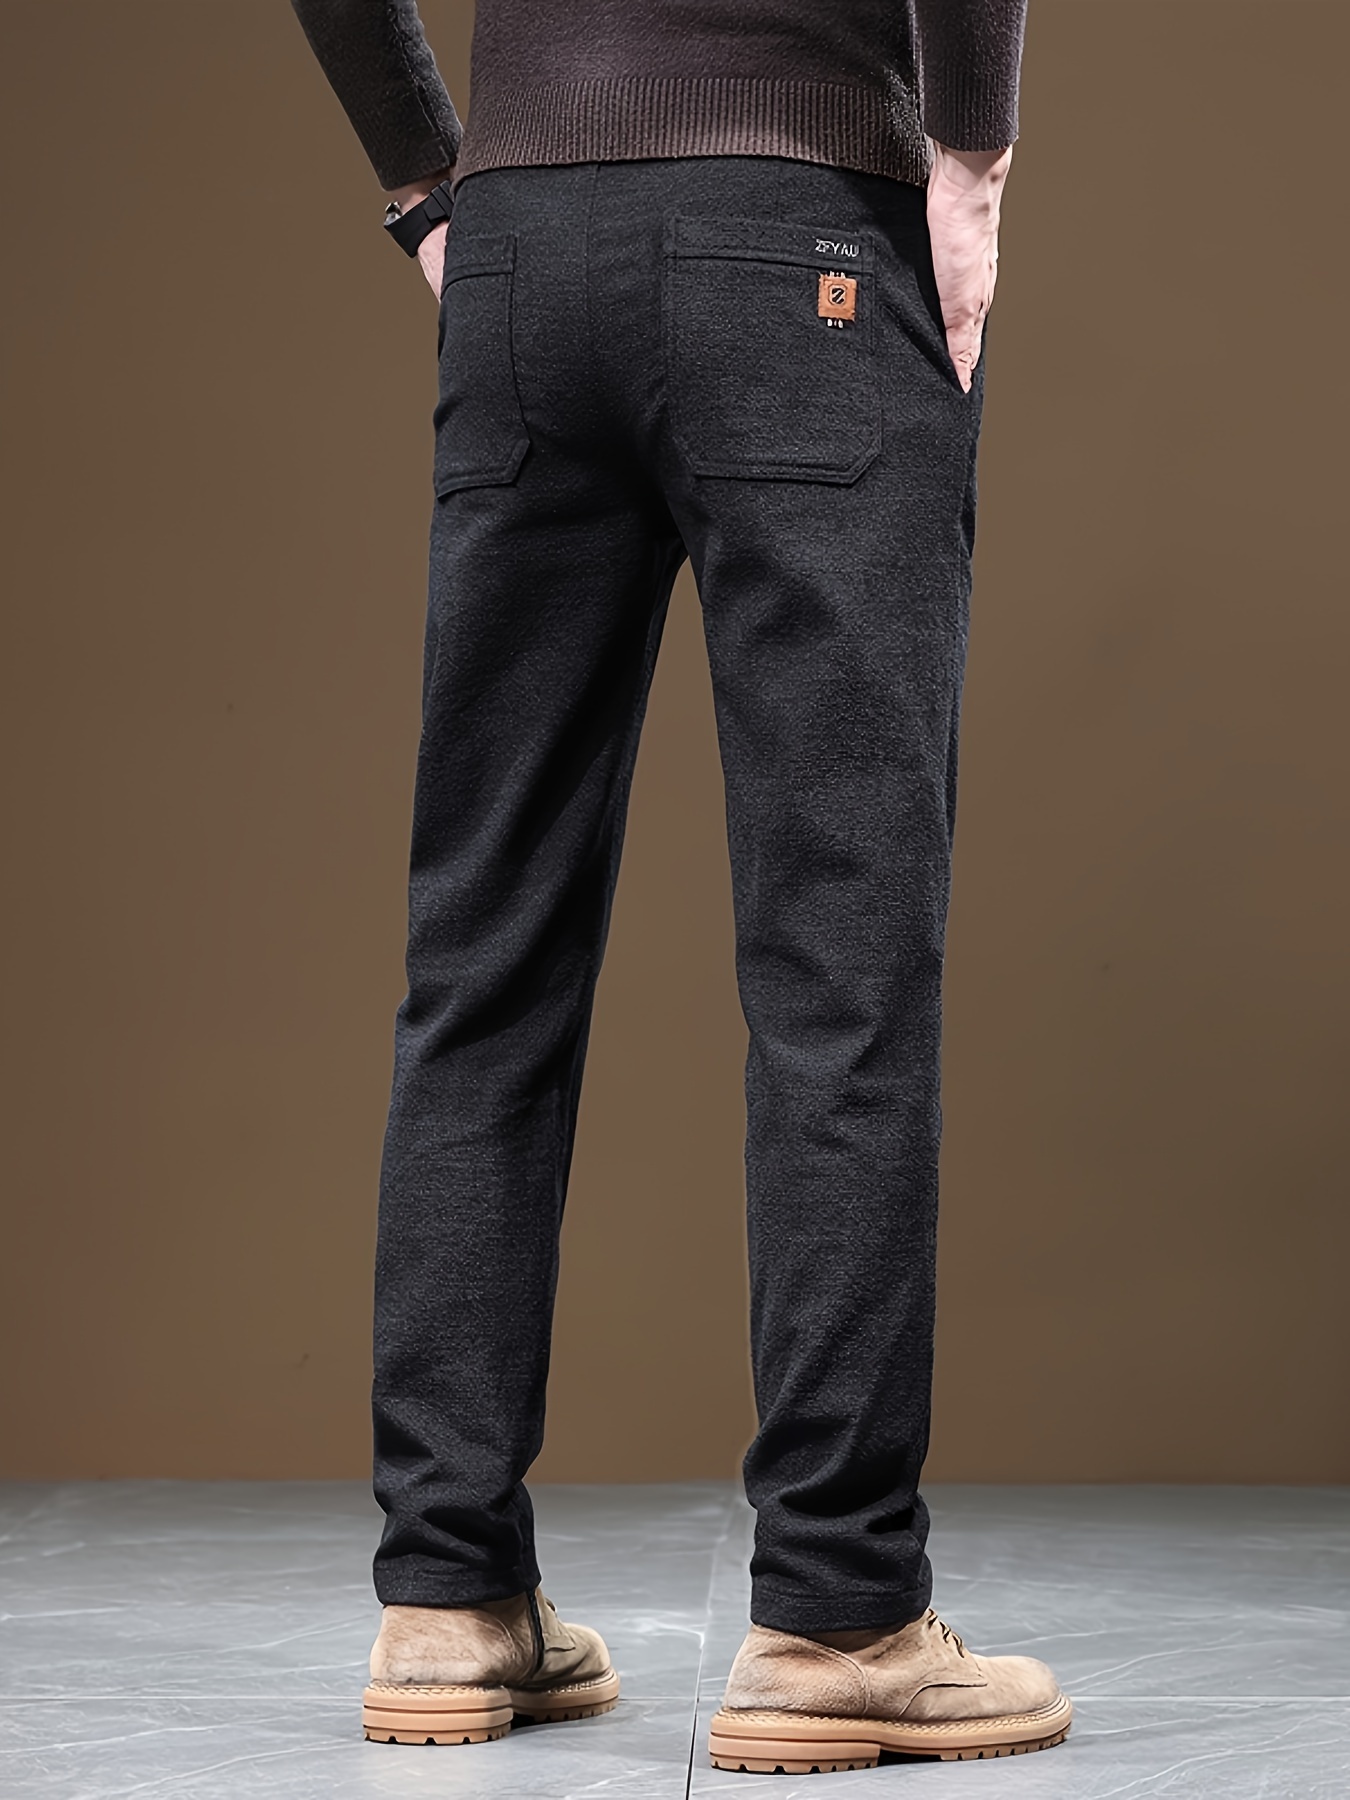 Men's Summer Ankle Length Pants Thin Casual Trousers Business Slim